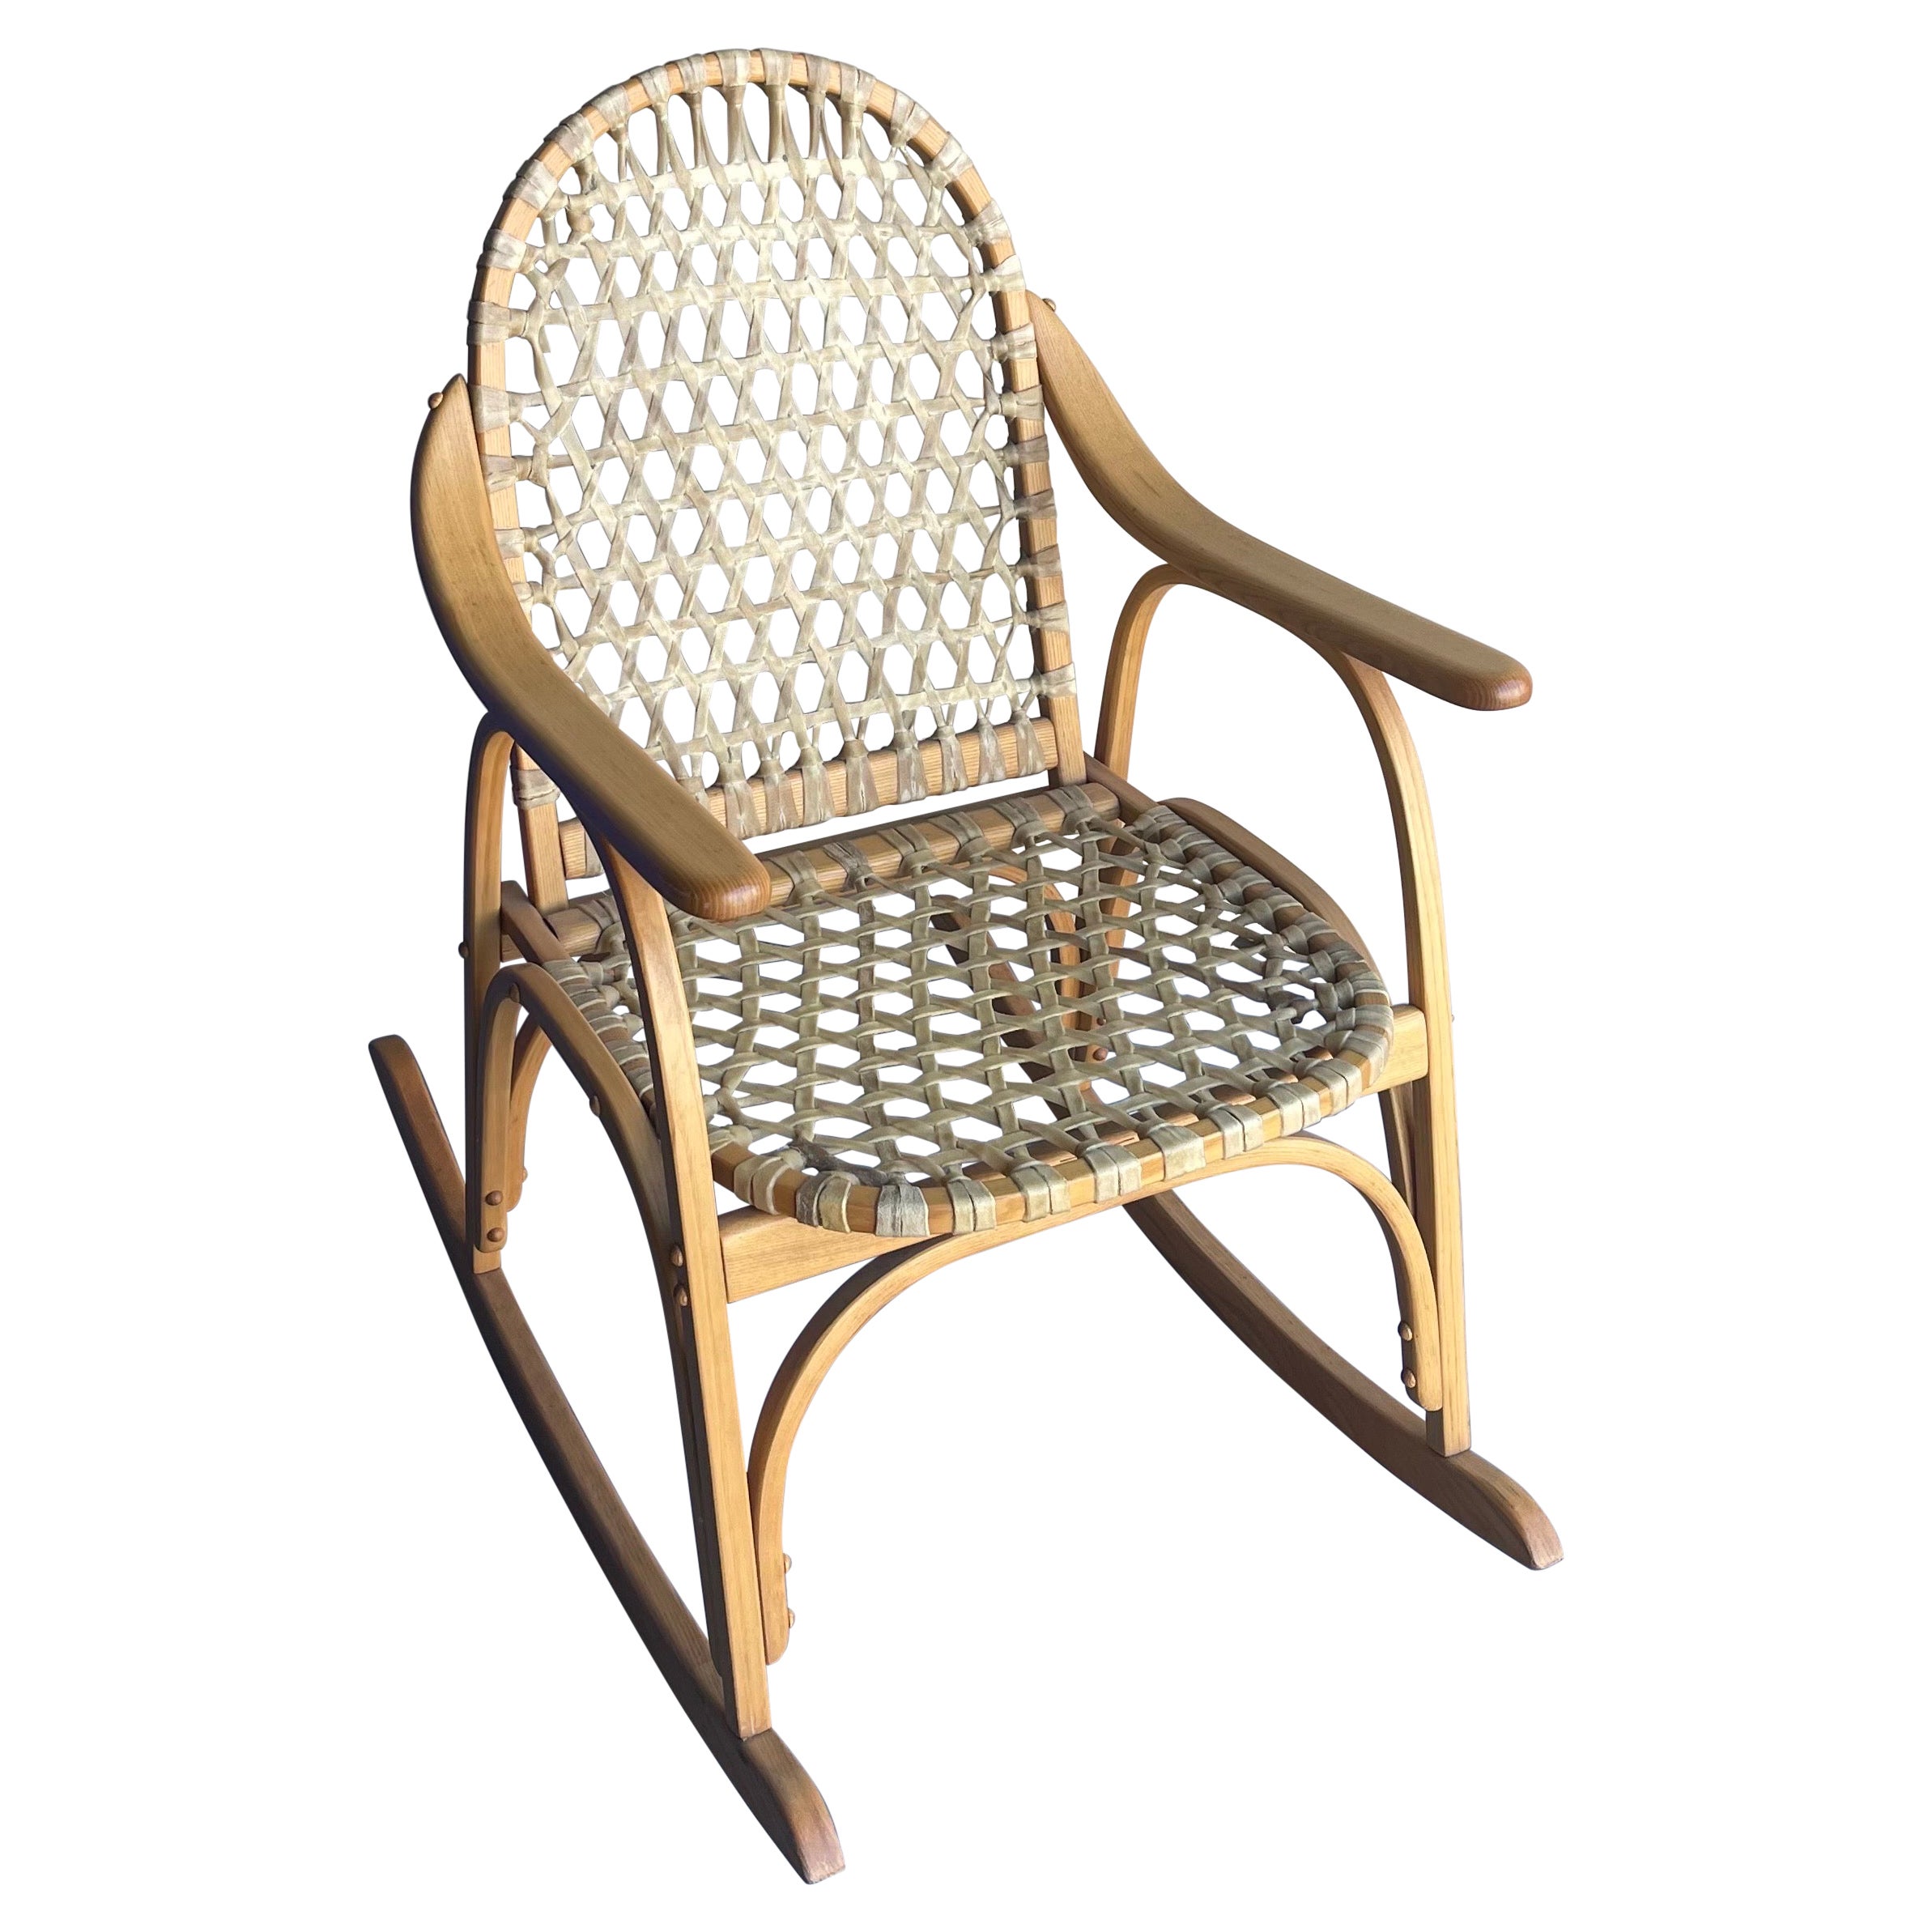 Vintage Snowshoe Rocking Chair by Iverson Snowshoe Co.